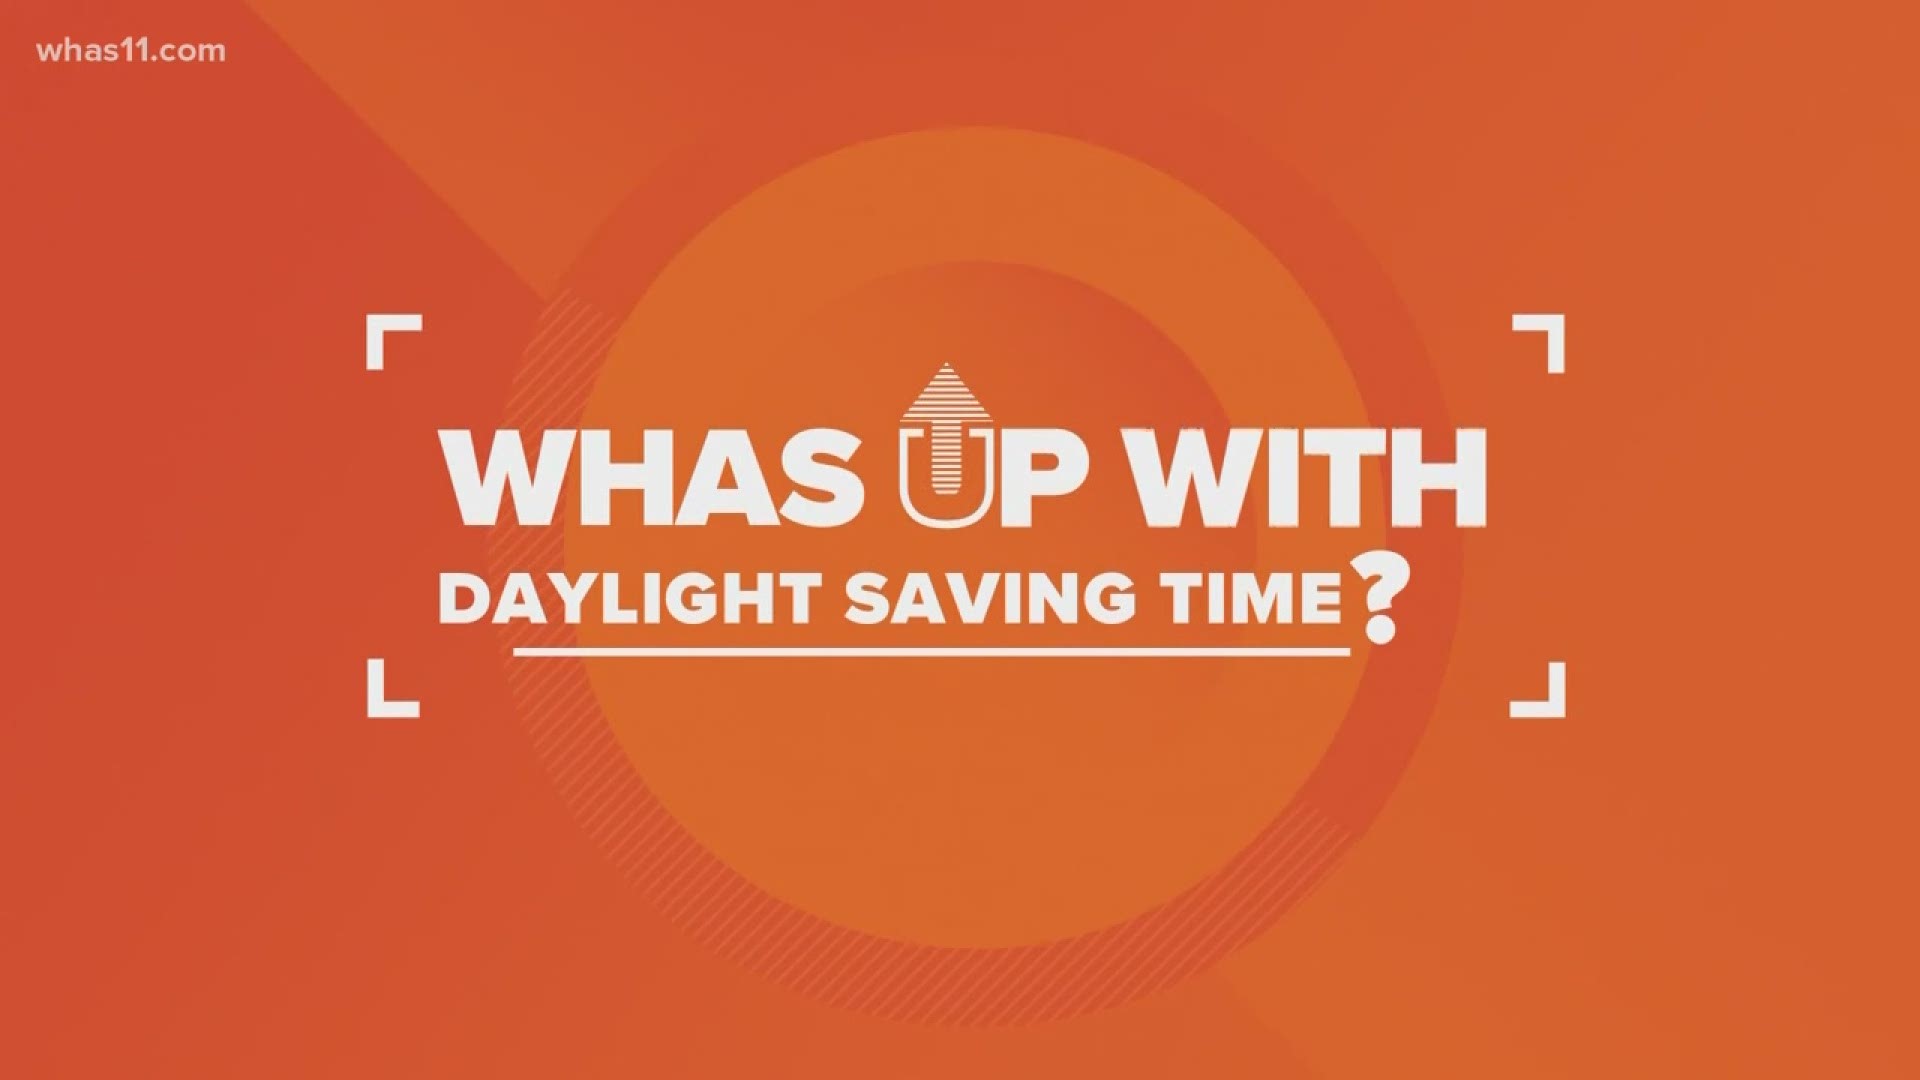 Several states are trying to get rid of Daylight Saving Time - but why do we even have it in the first place?